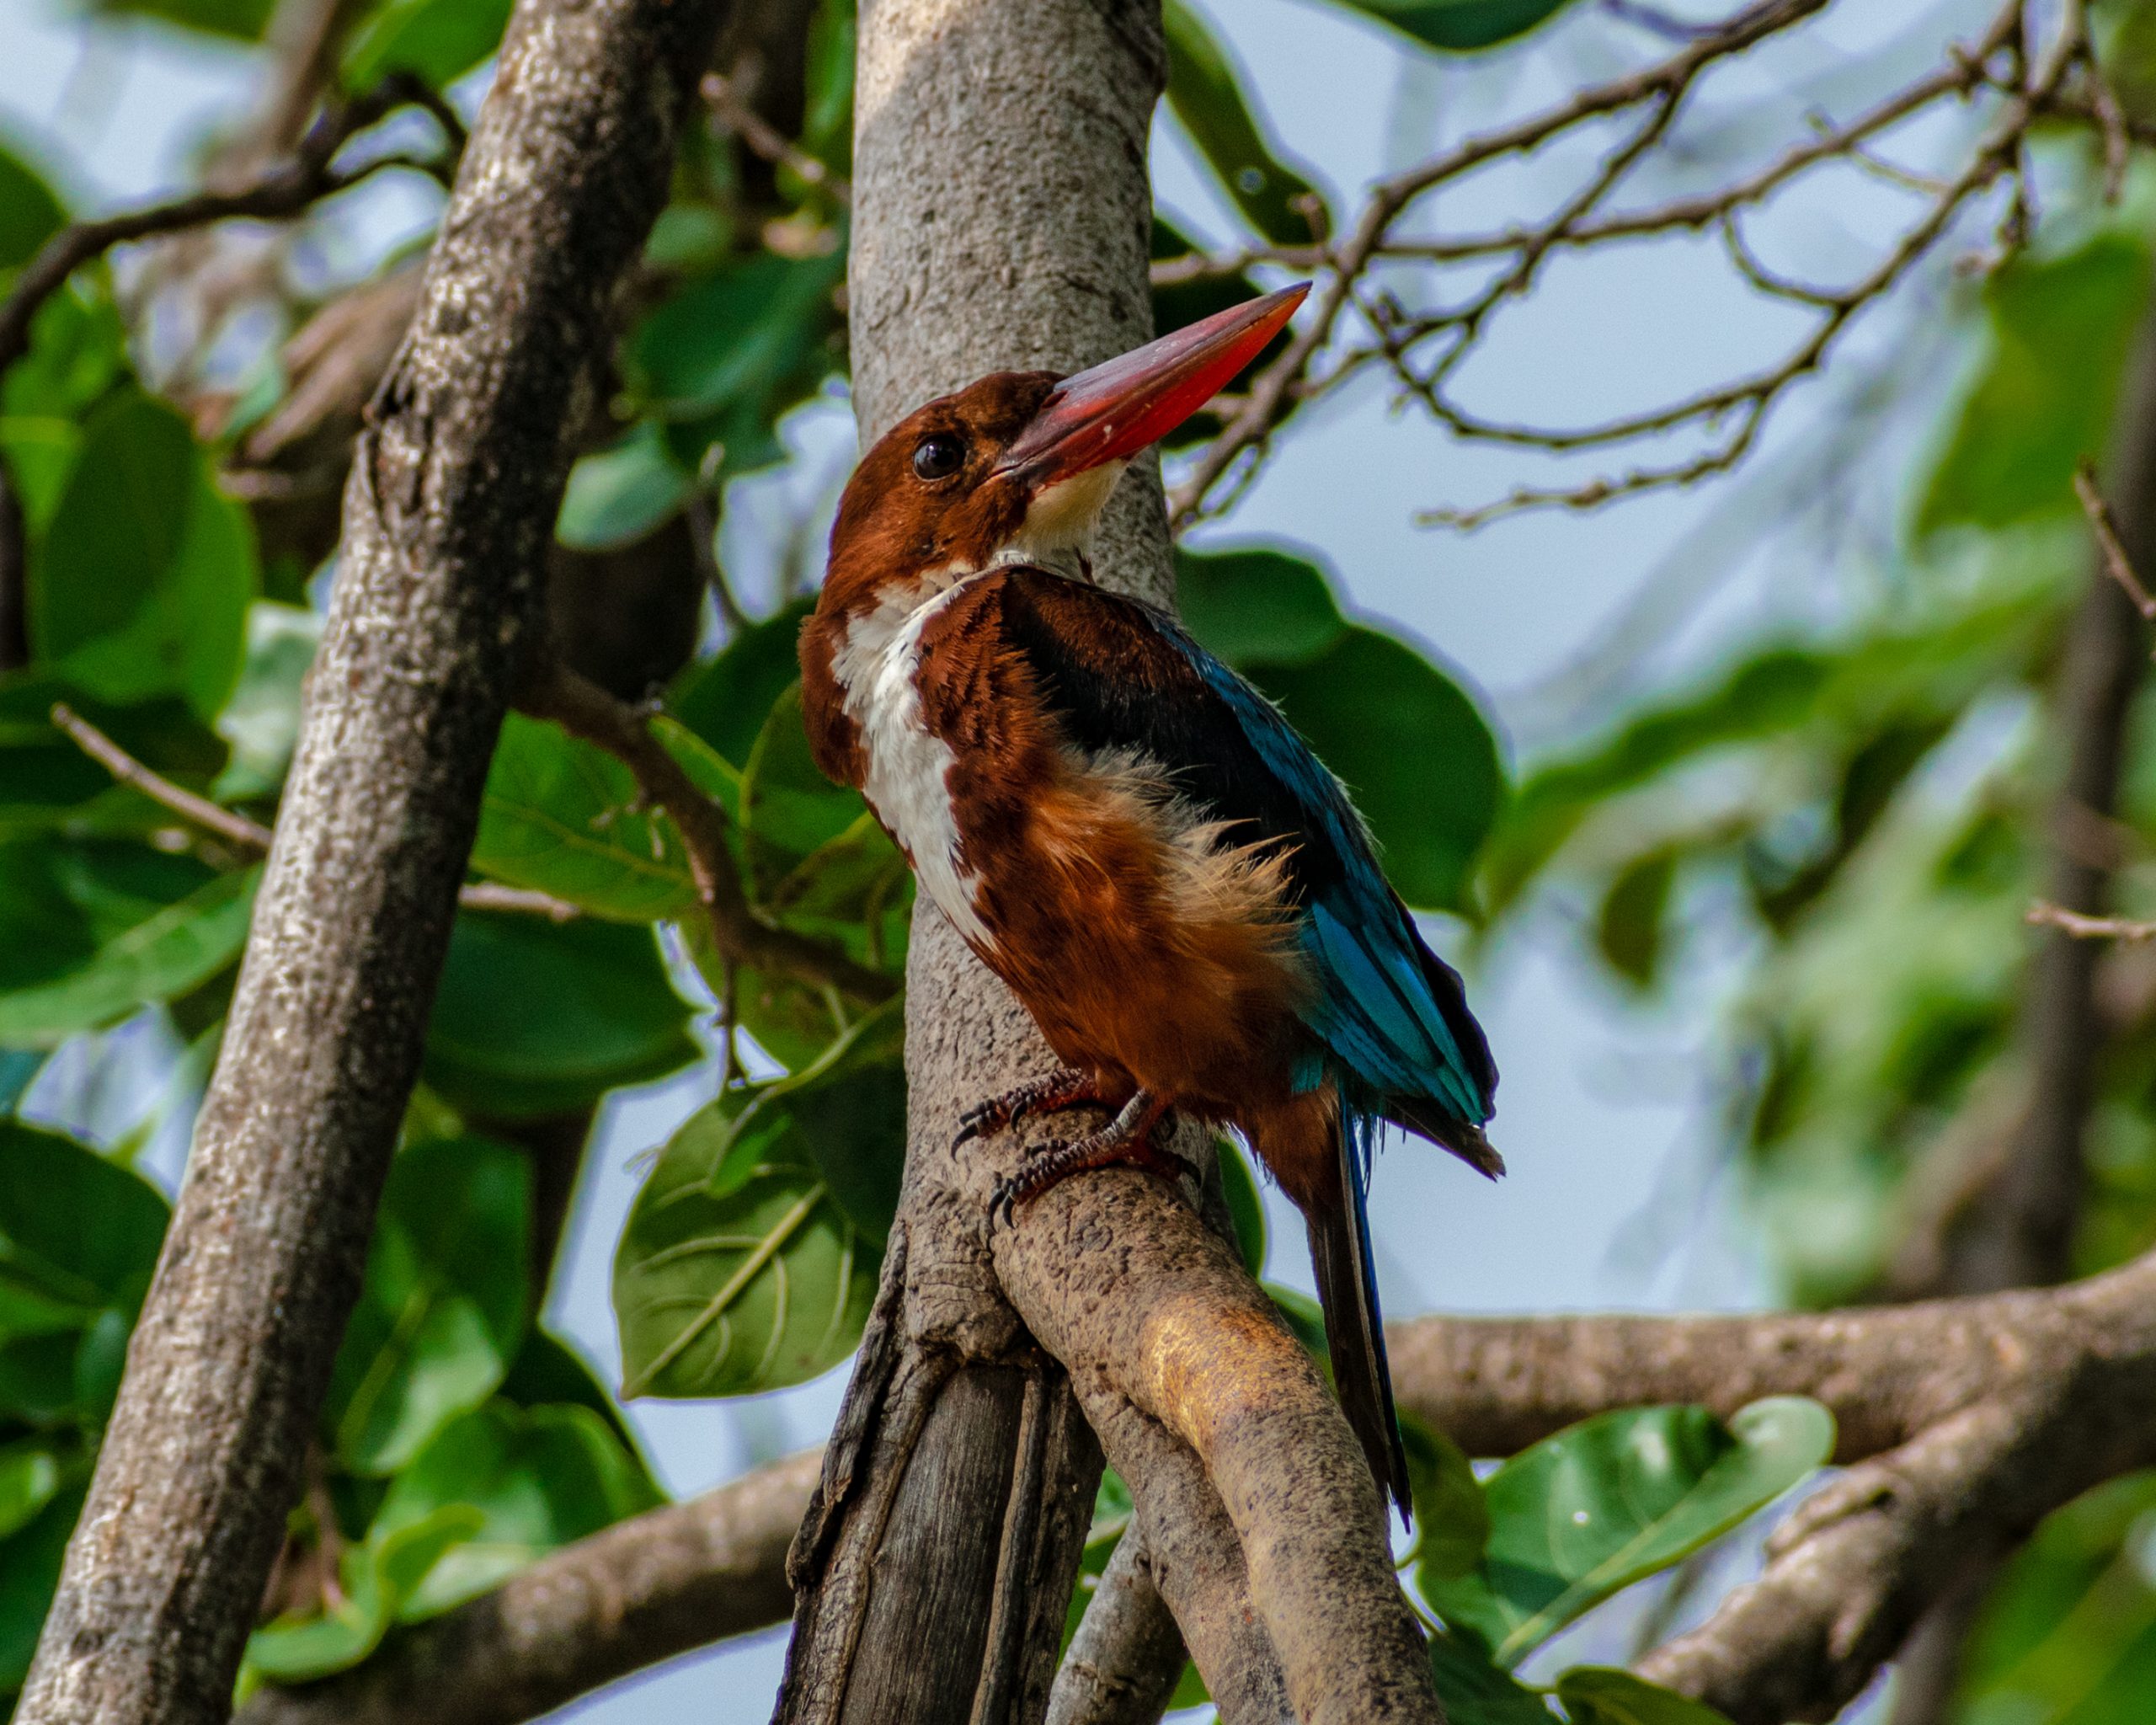 White-throated kingfisher sitting on a tree